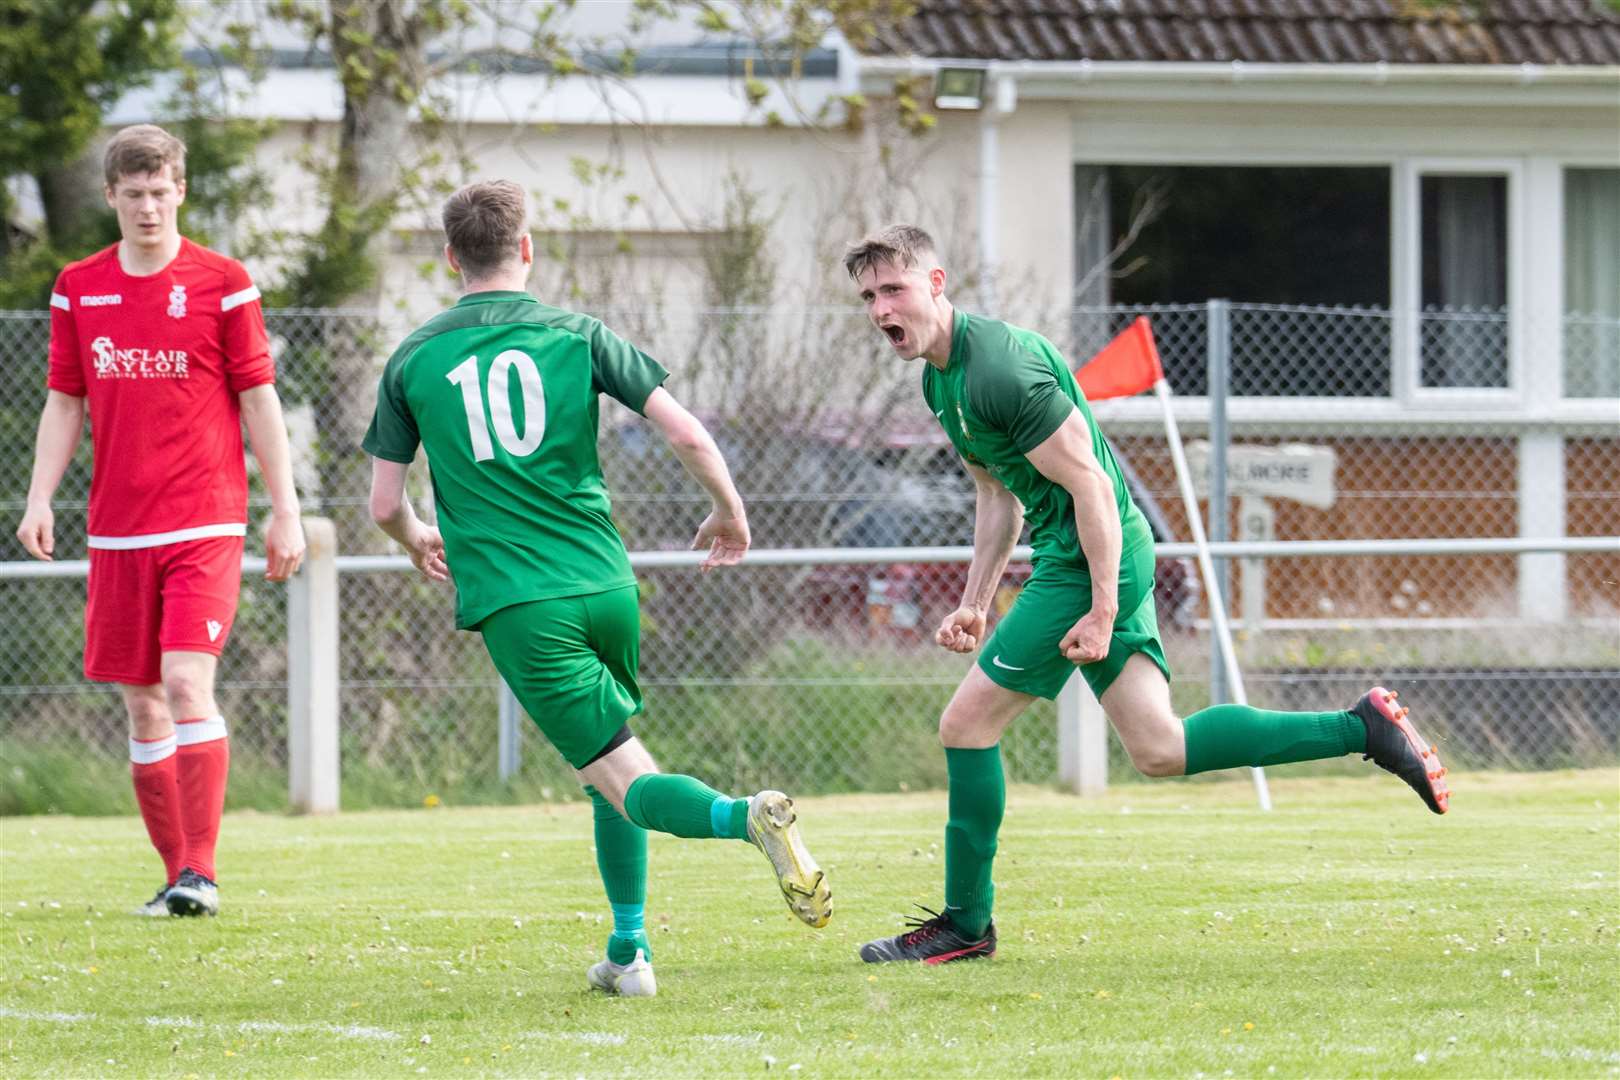 Finlay Stables roars with delight after putting Dufftown ahead in the second half...Dufftown FC (2) vs Forres Thistle FC (2) - Dufftown FC win 5-3 on penalties - Elginshire Cup Final held at Logie Park, Forres 14/05/2022...Picture: Daniel Forsyth..